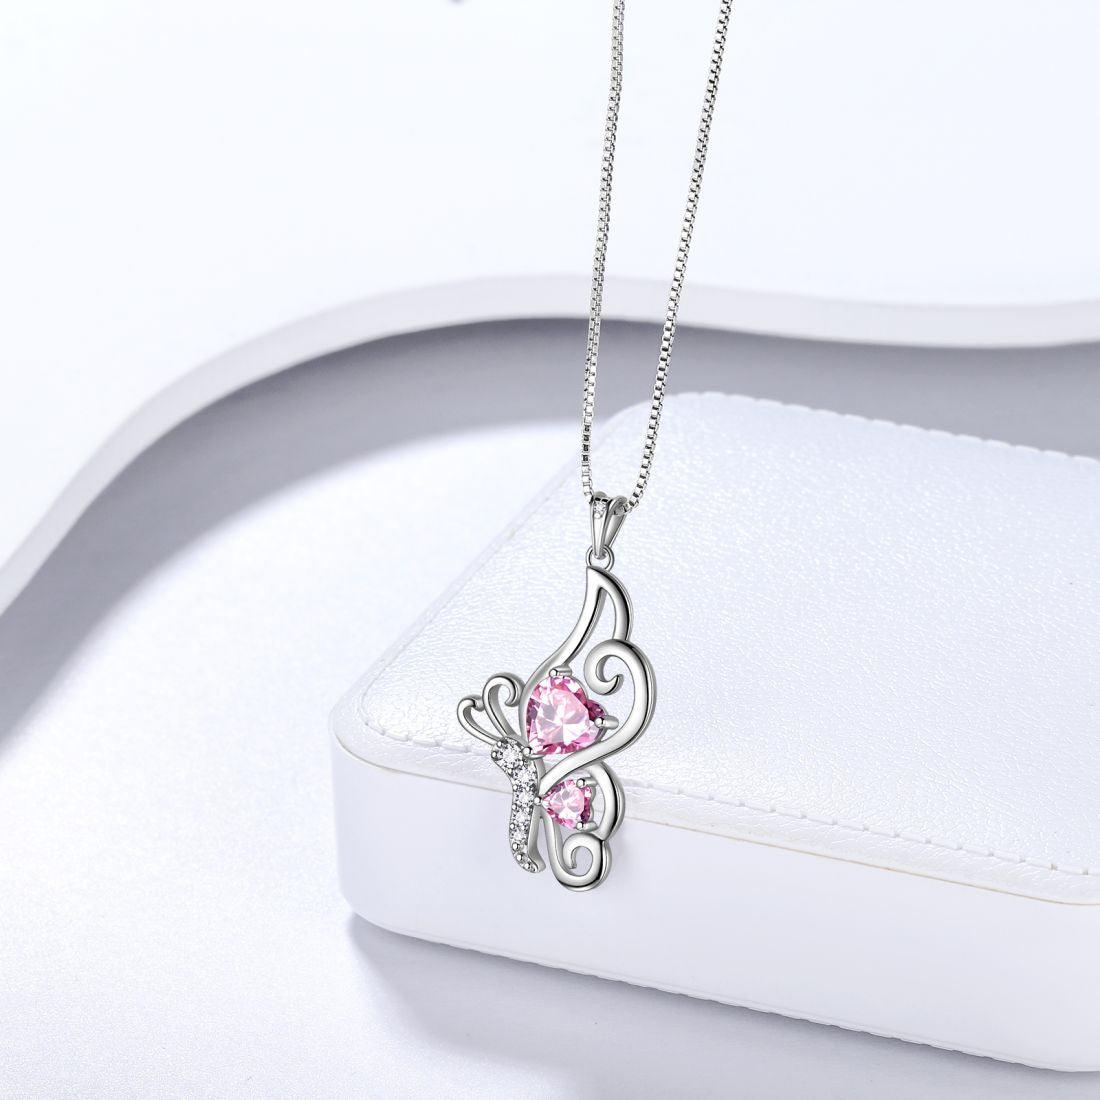 Butterfly Birthstone October Tourmaline Necklace Sterling Silver - Necklaces - Aurora Tears